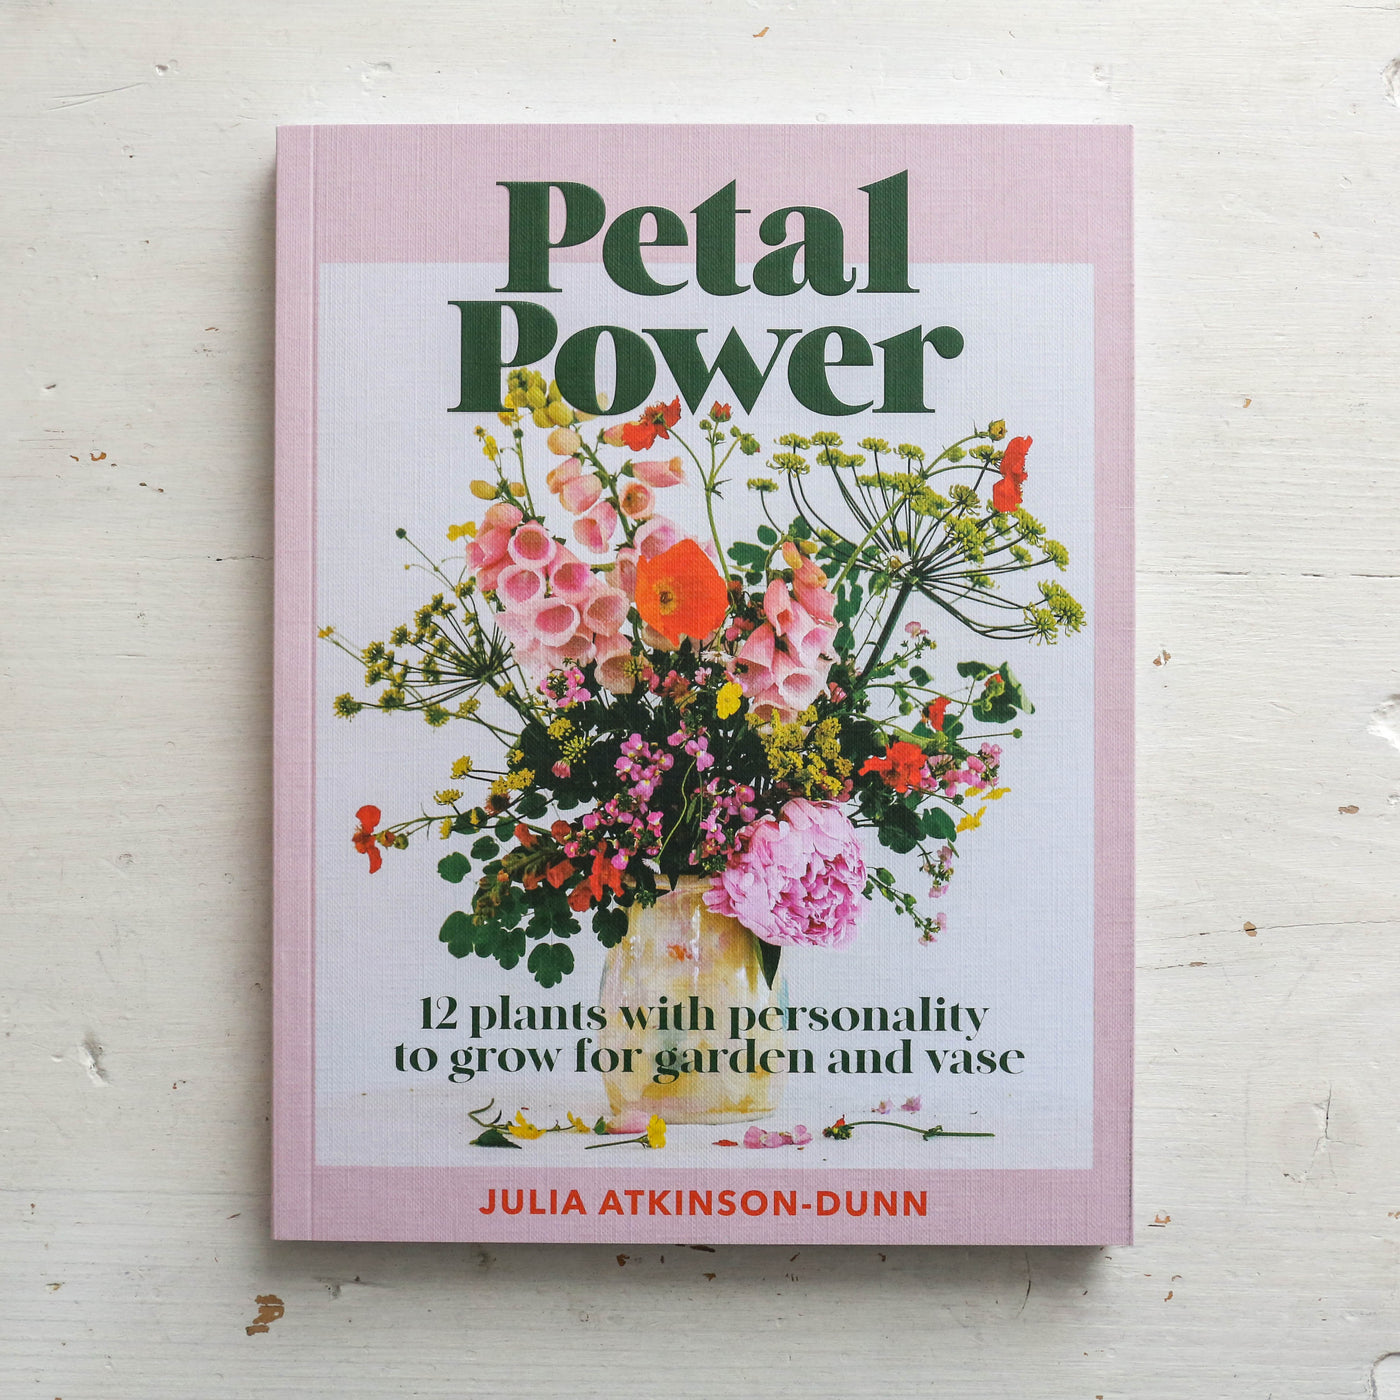 Petal Power: 12 plants with personality to grow for garden and vase